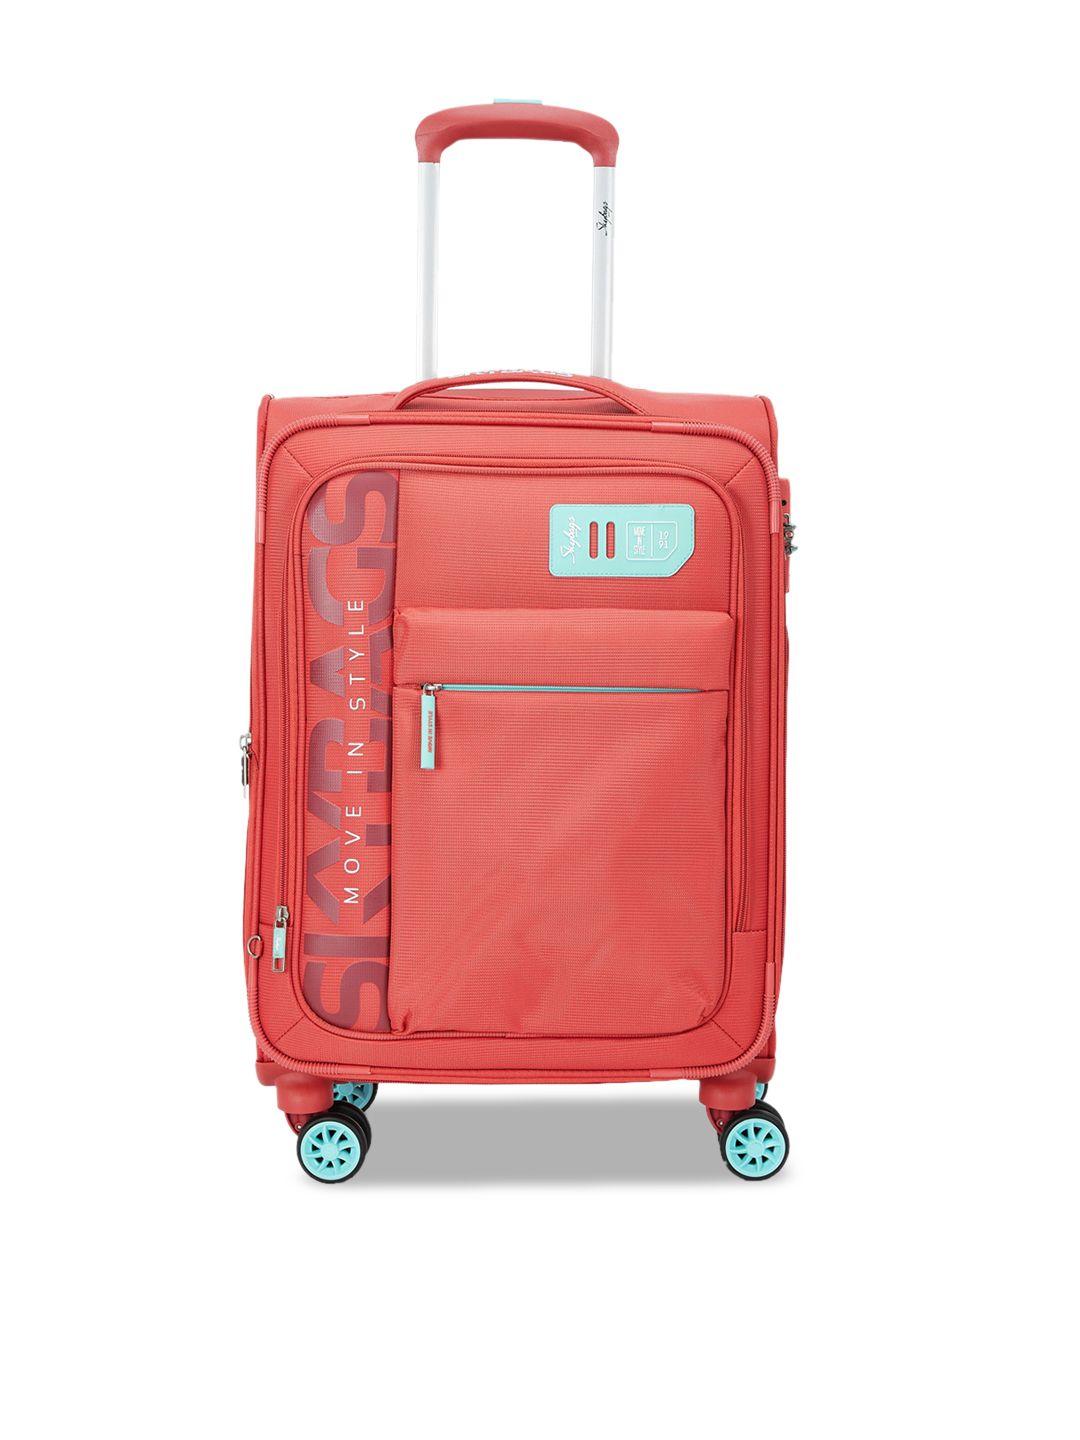 skybags vanguard plus hard-sided cabin trolley suitcase